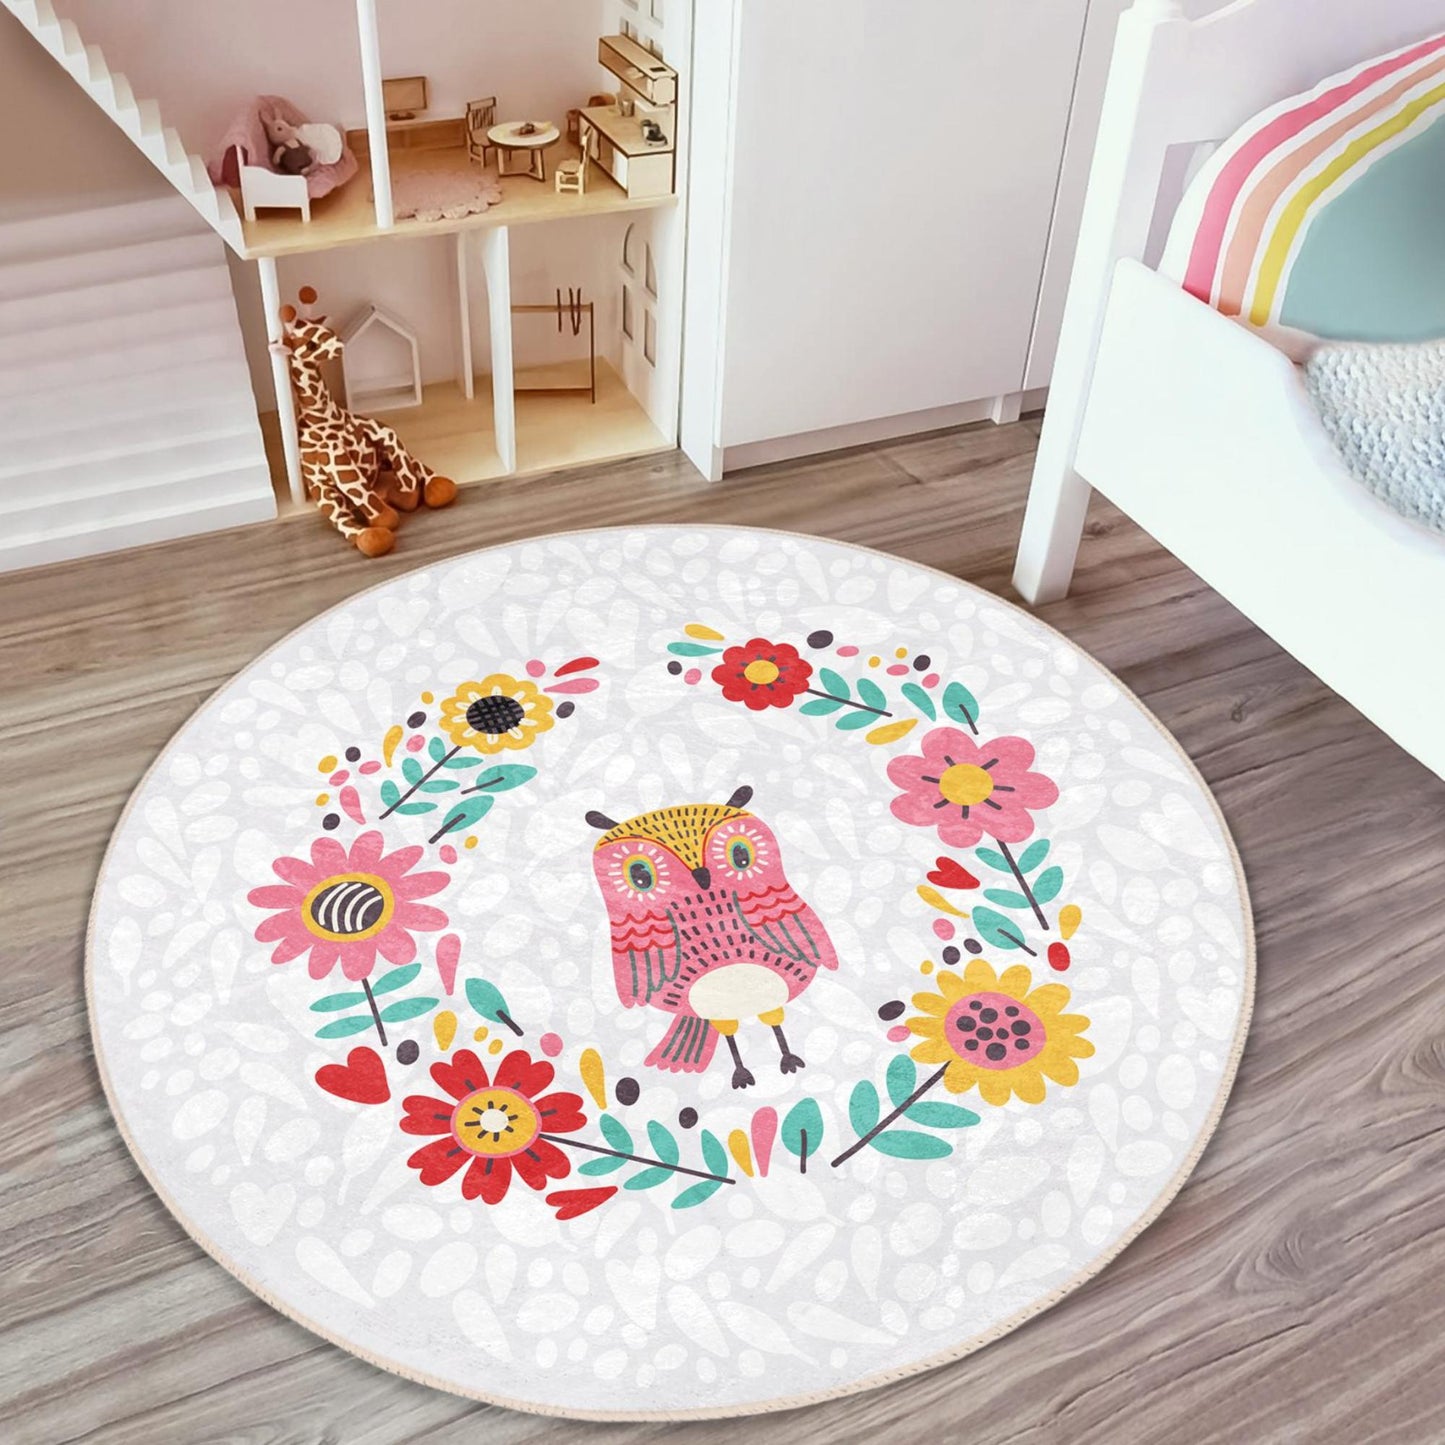 Fun-filled rug featuring colorful floral designs for children's room ambiance.